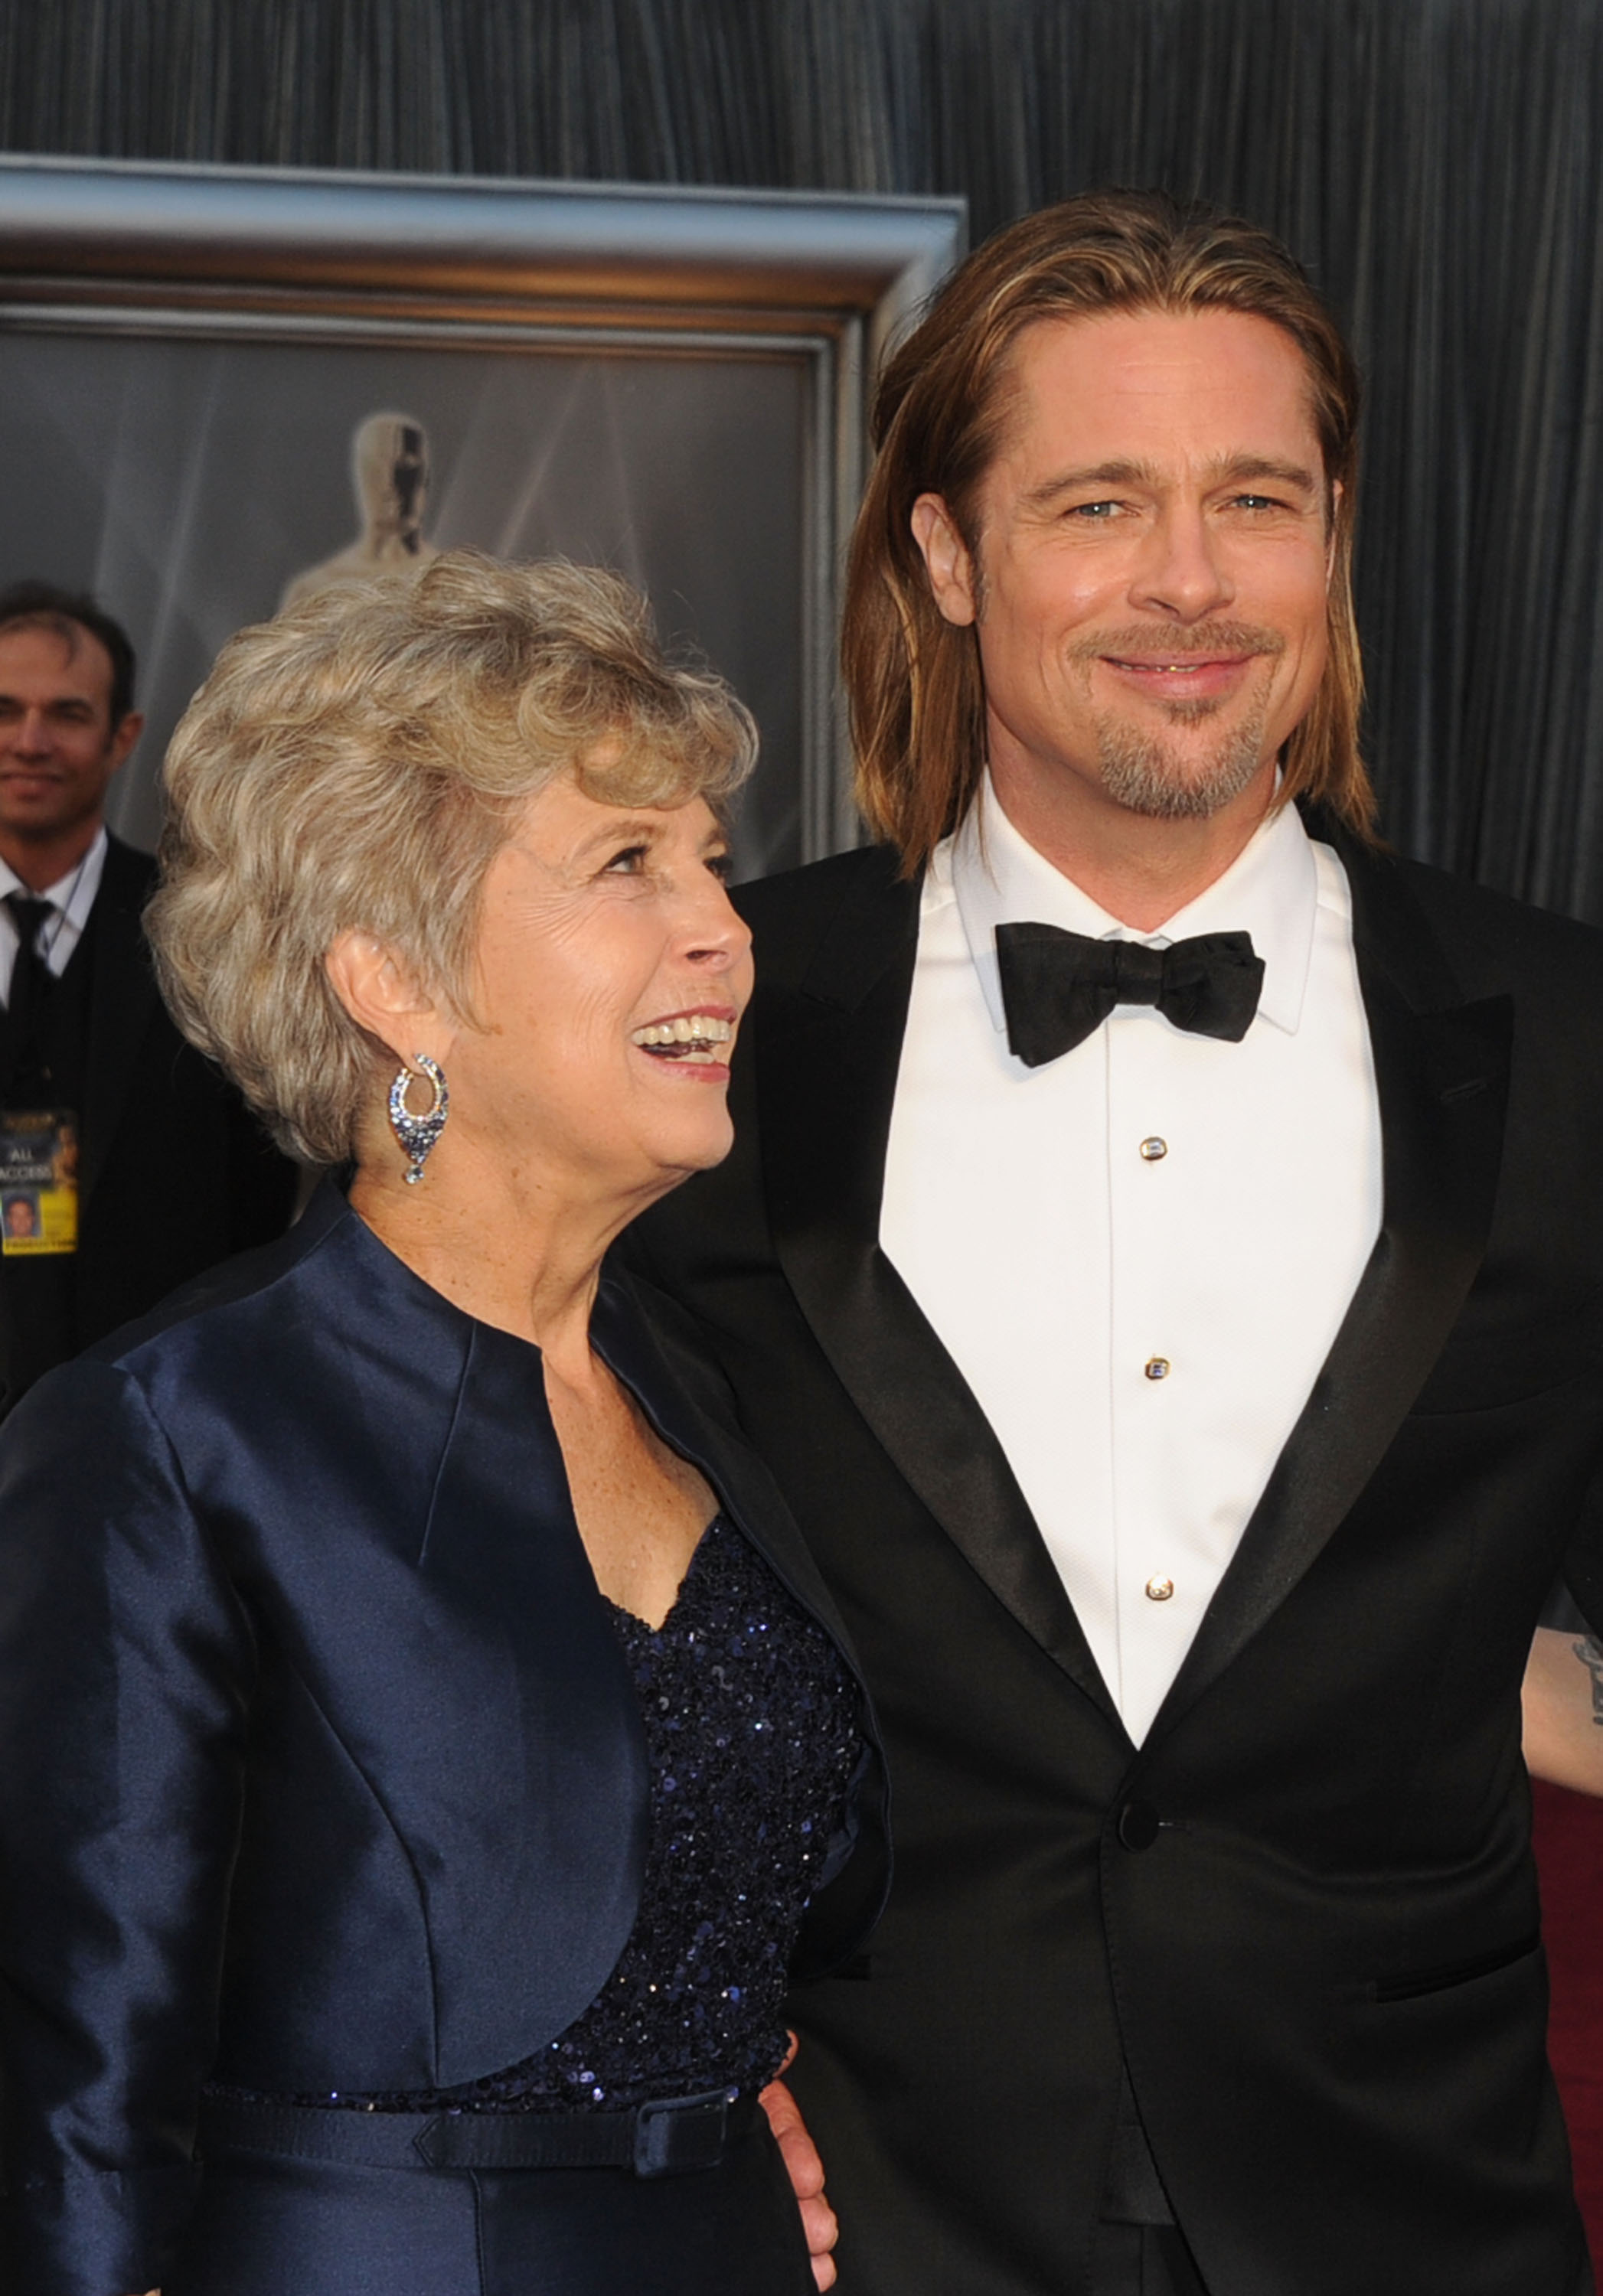 Jane and Brad Pitt at the 84th Annual Academy Awards in Hollywood, 2012 | Source: Getty Images